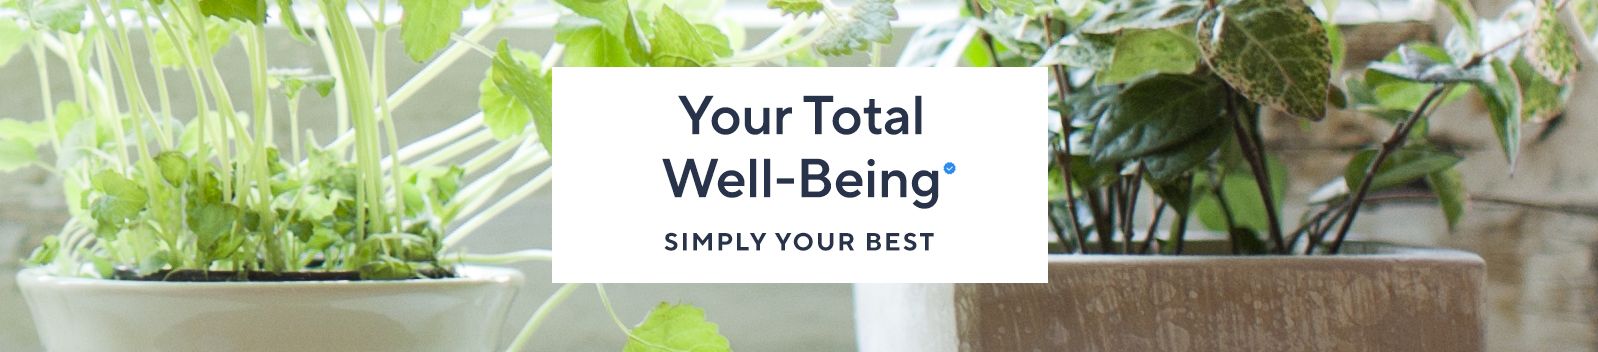 Your Total Well-Being. Simply Your Best